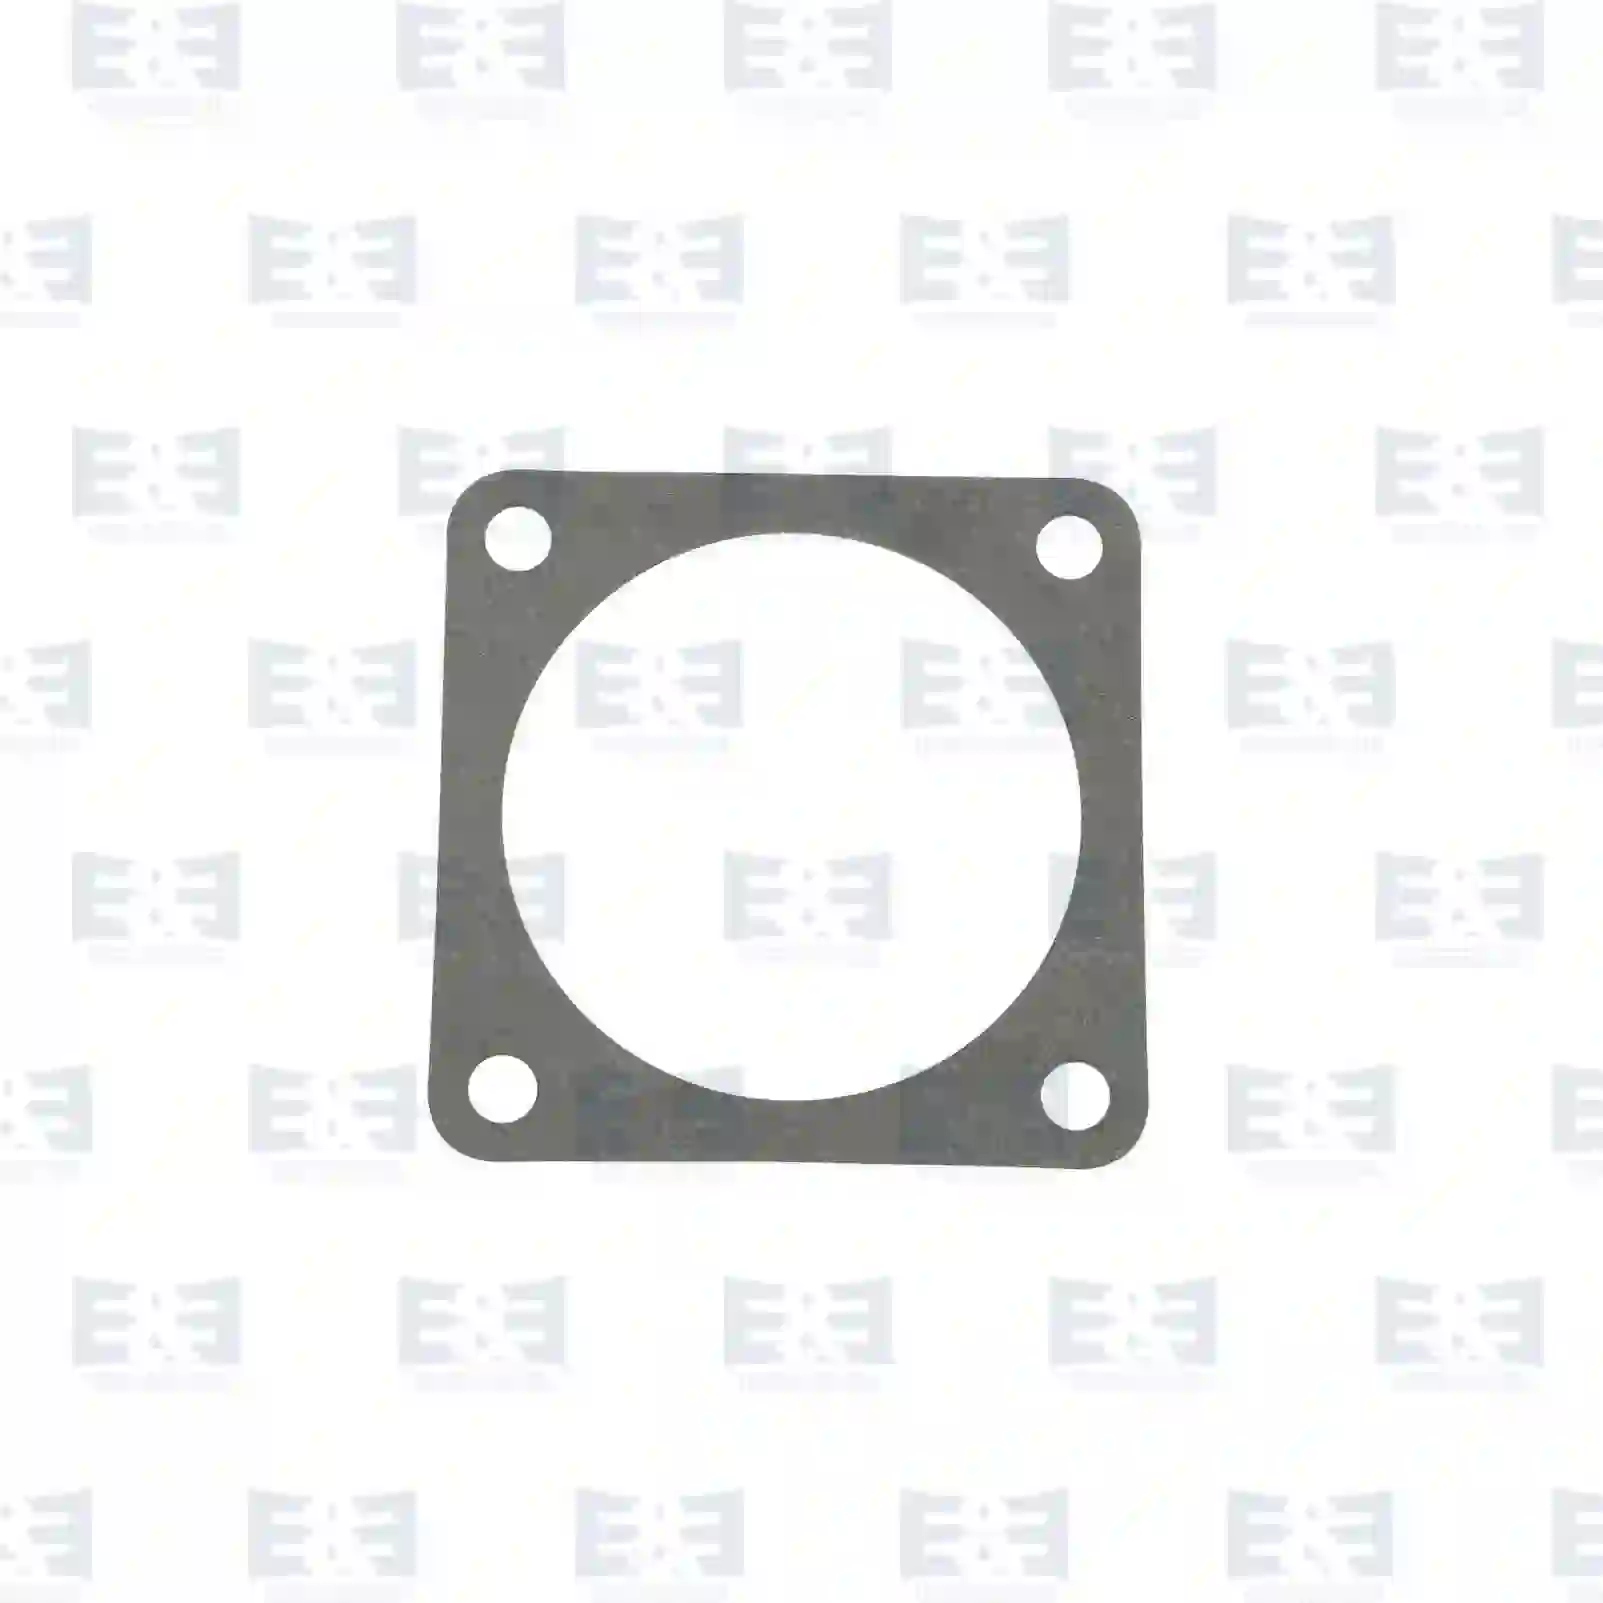 Gasket, cooling water pipe, 2E2202185, 5000694361, 5000694361, ZG00407-0008 ||  2E2202185 E&E Truck Spare Parts | Truck Spare Parts, Auotomotive Spare Parts Gasket, cooling water pipe, 2E2202185, 5000694361, 5000694361, ZG00407-0008 ||  2E2202185 E&E Truck Spare Parts | Truck Spare Parts, Auotomotive Spare Parts